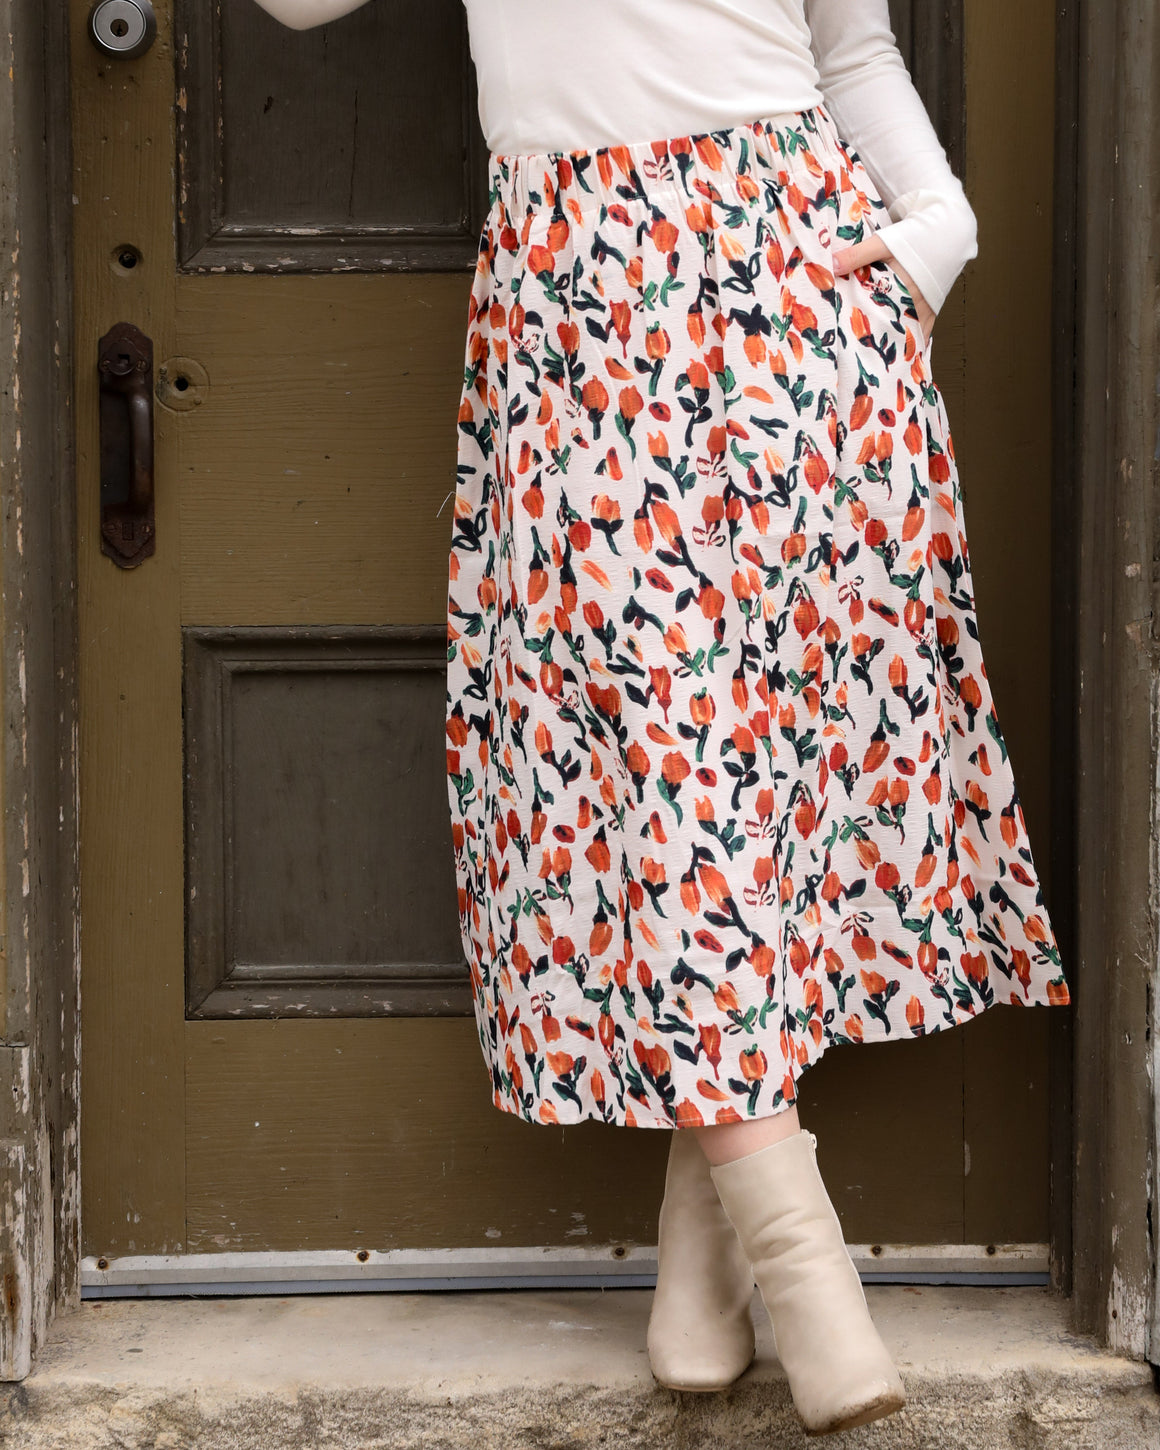 Vintage Inspired Tulip Print Skirt with Pockets